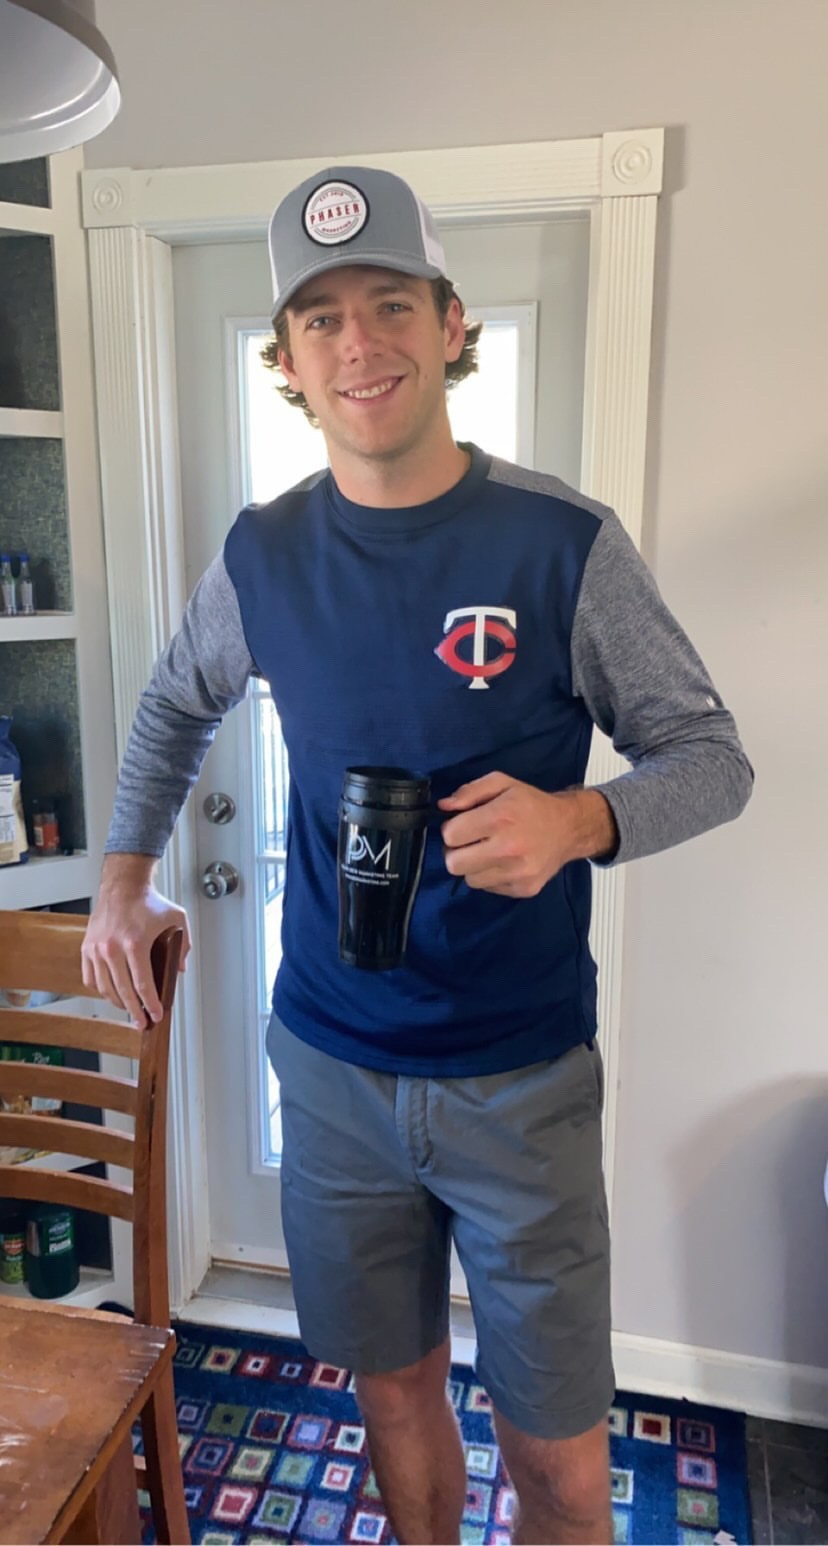 Derek Herzog wearing our 3rd Edition Patch hat and using our PM mug